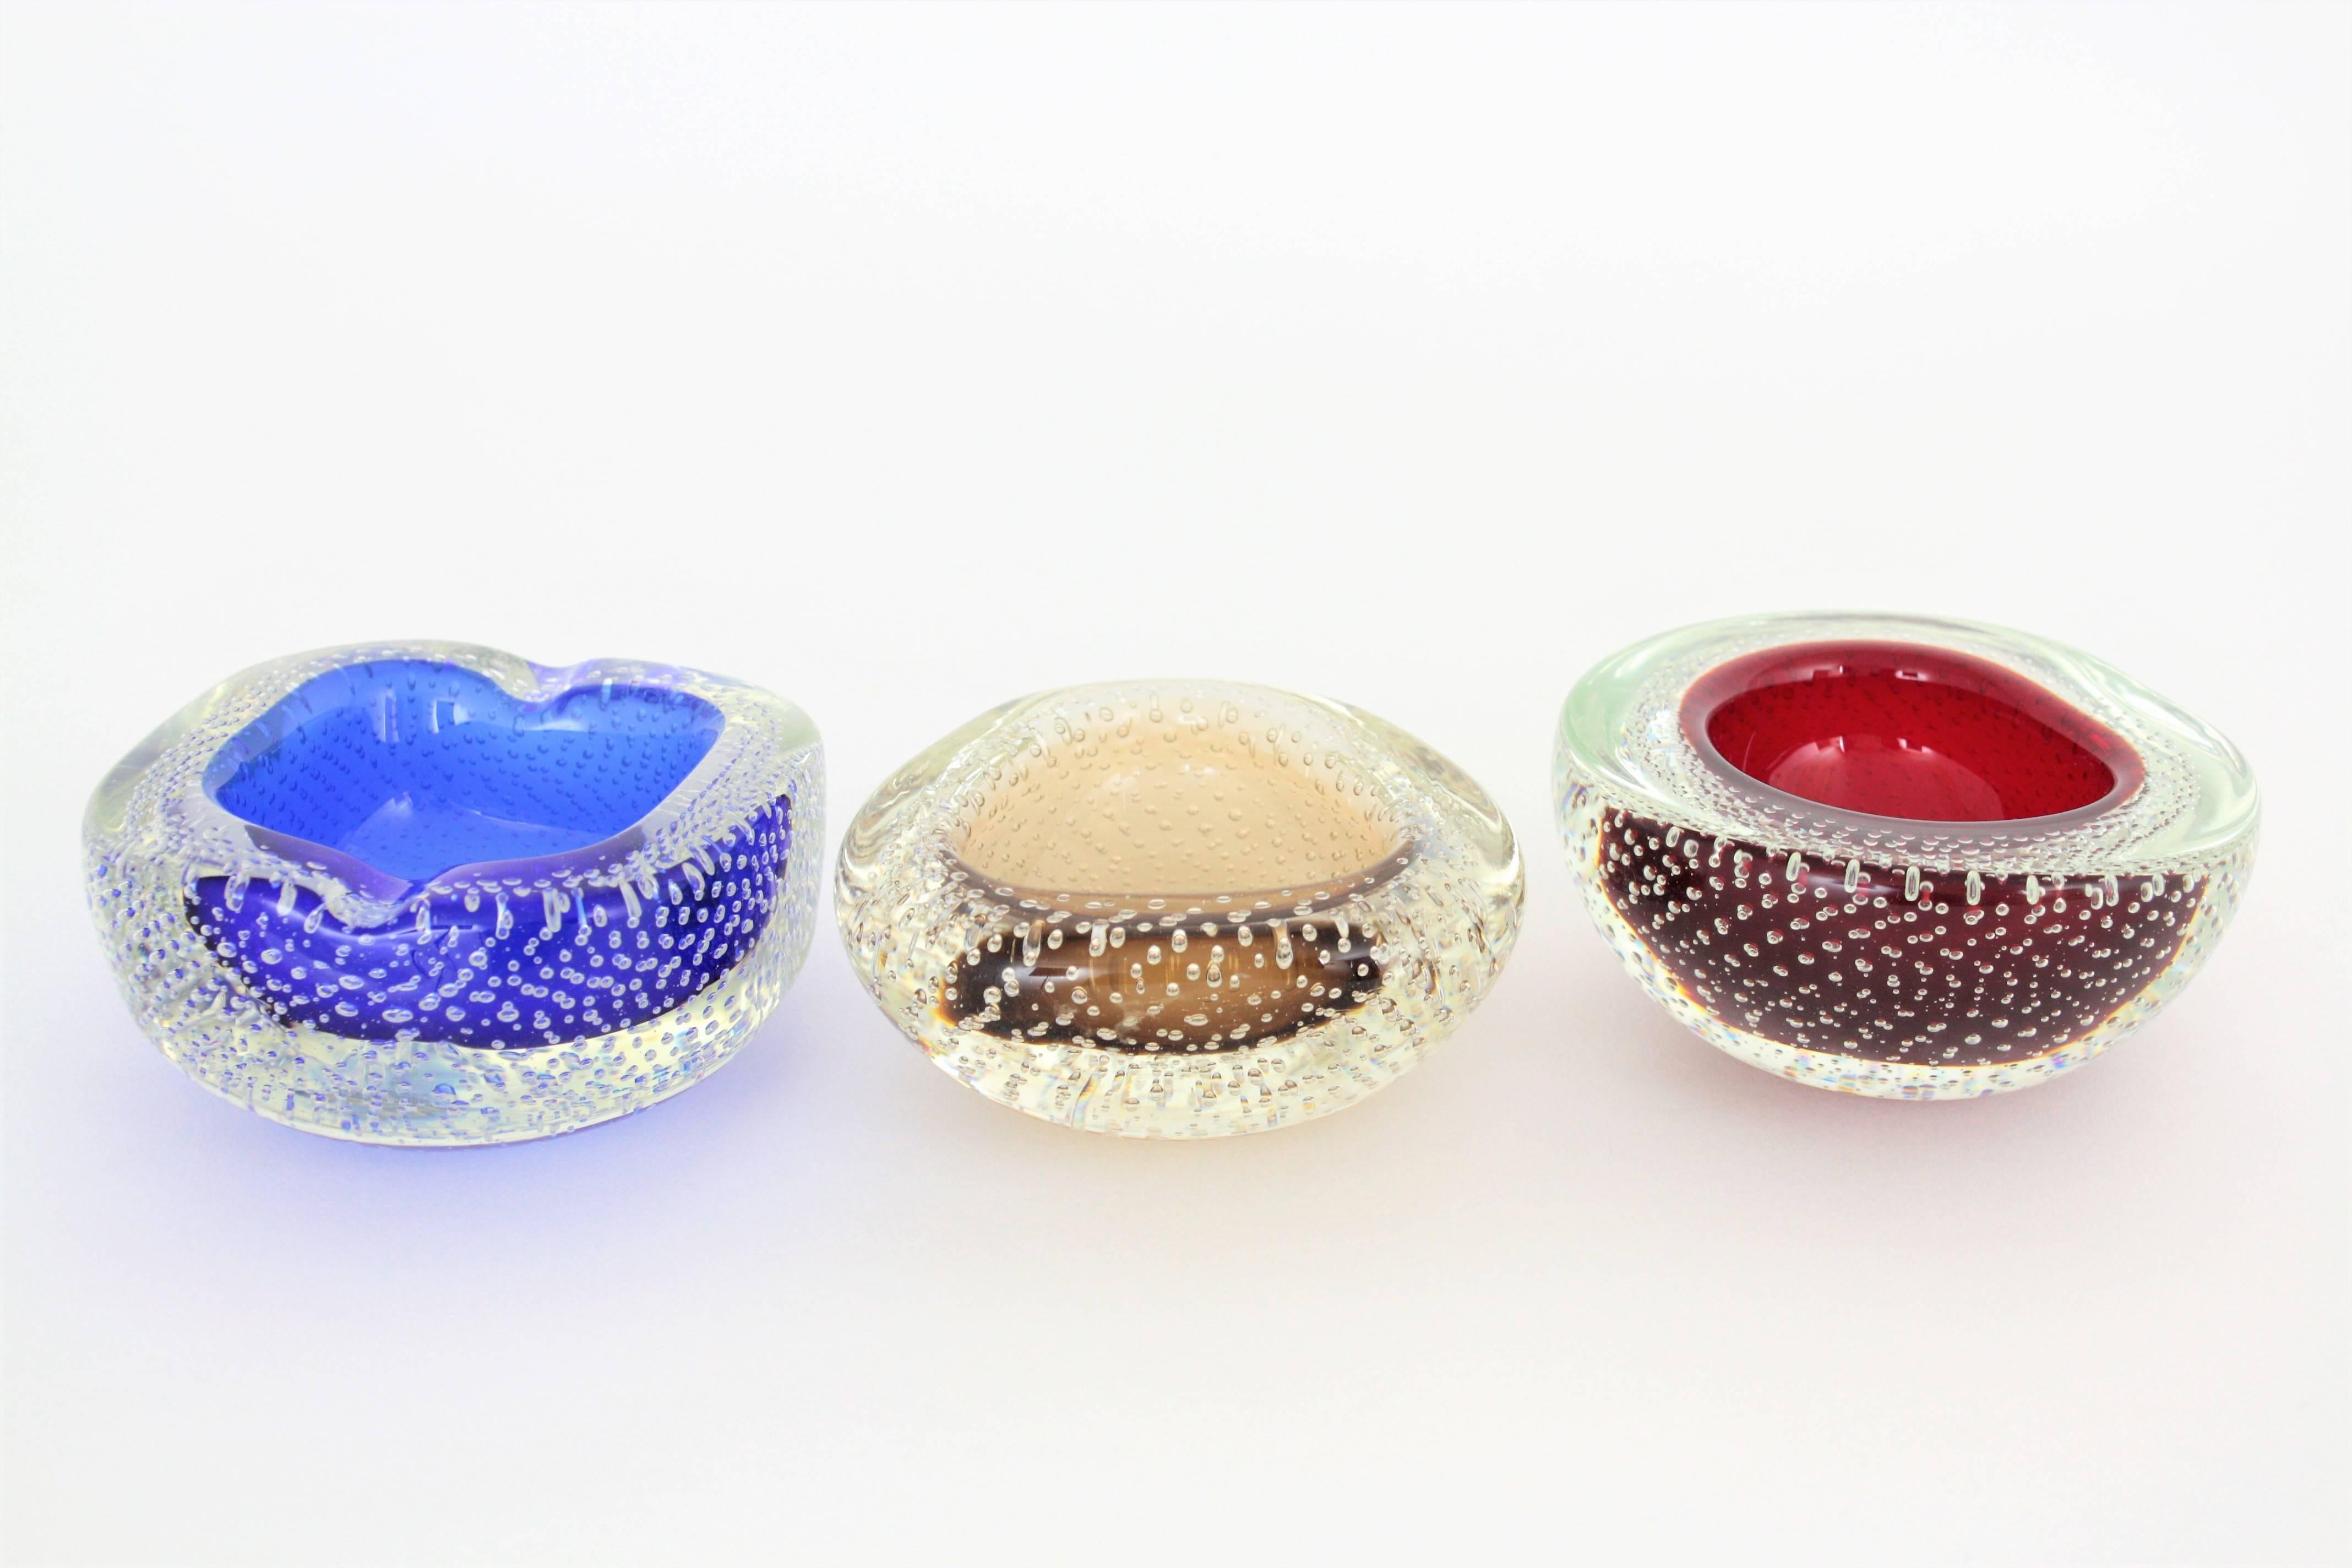 A beautiful set of three handblown geode Murano glass bowls attributed to Galliano Ferro. Red, blue and toffee glass cased into clear glass and a highly decorative controlled bubbles decoration. Each one has different shape.
The red and the toffee